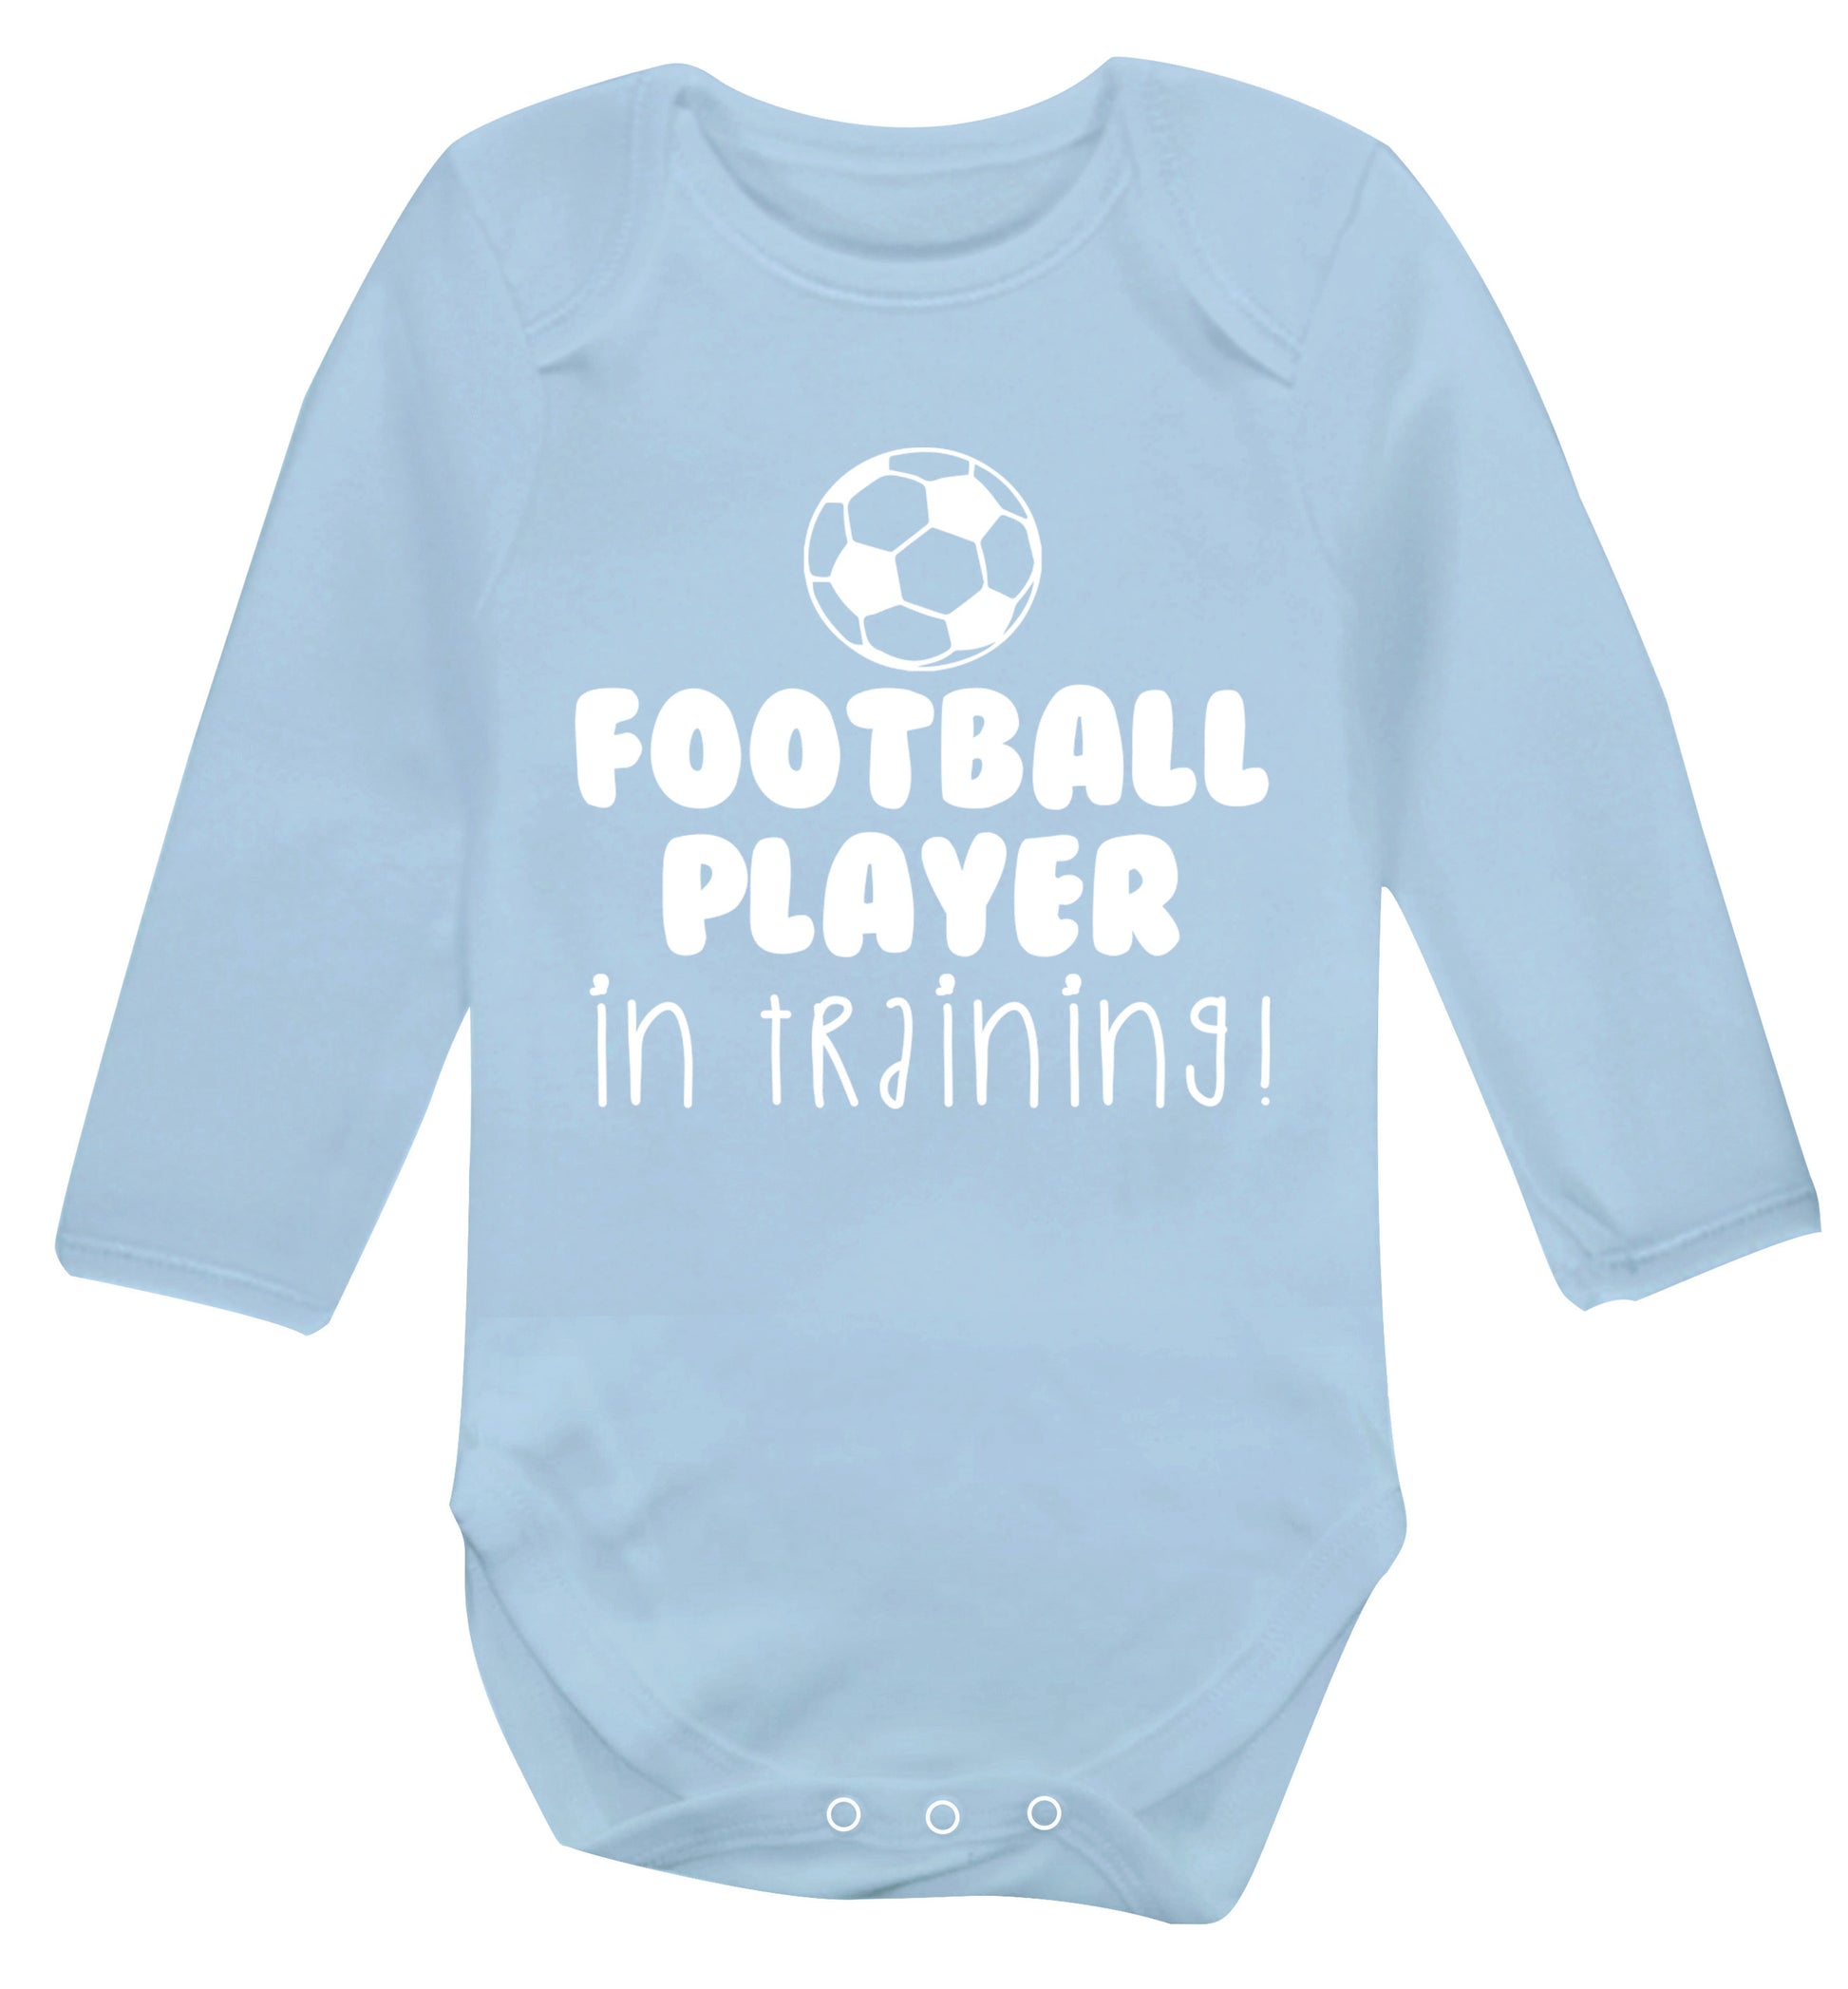 Football player in training Baby Vest long sleeved pale blue 6-12 months